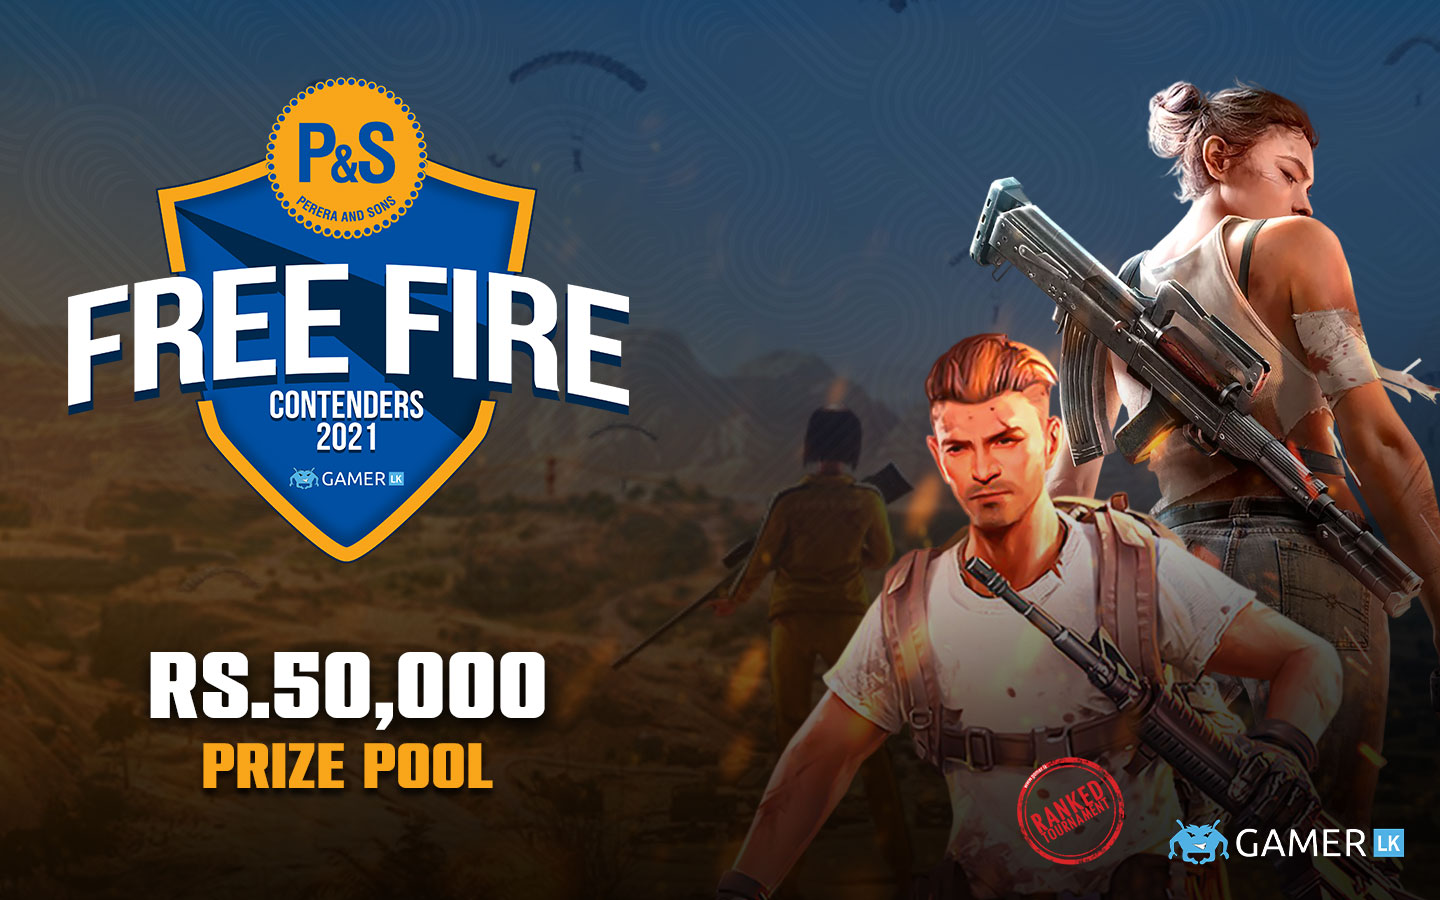 P&S Free Fire Contenders